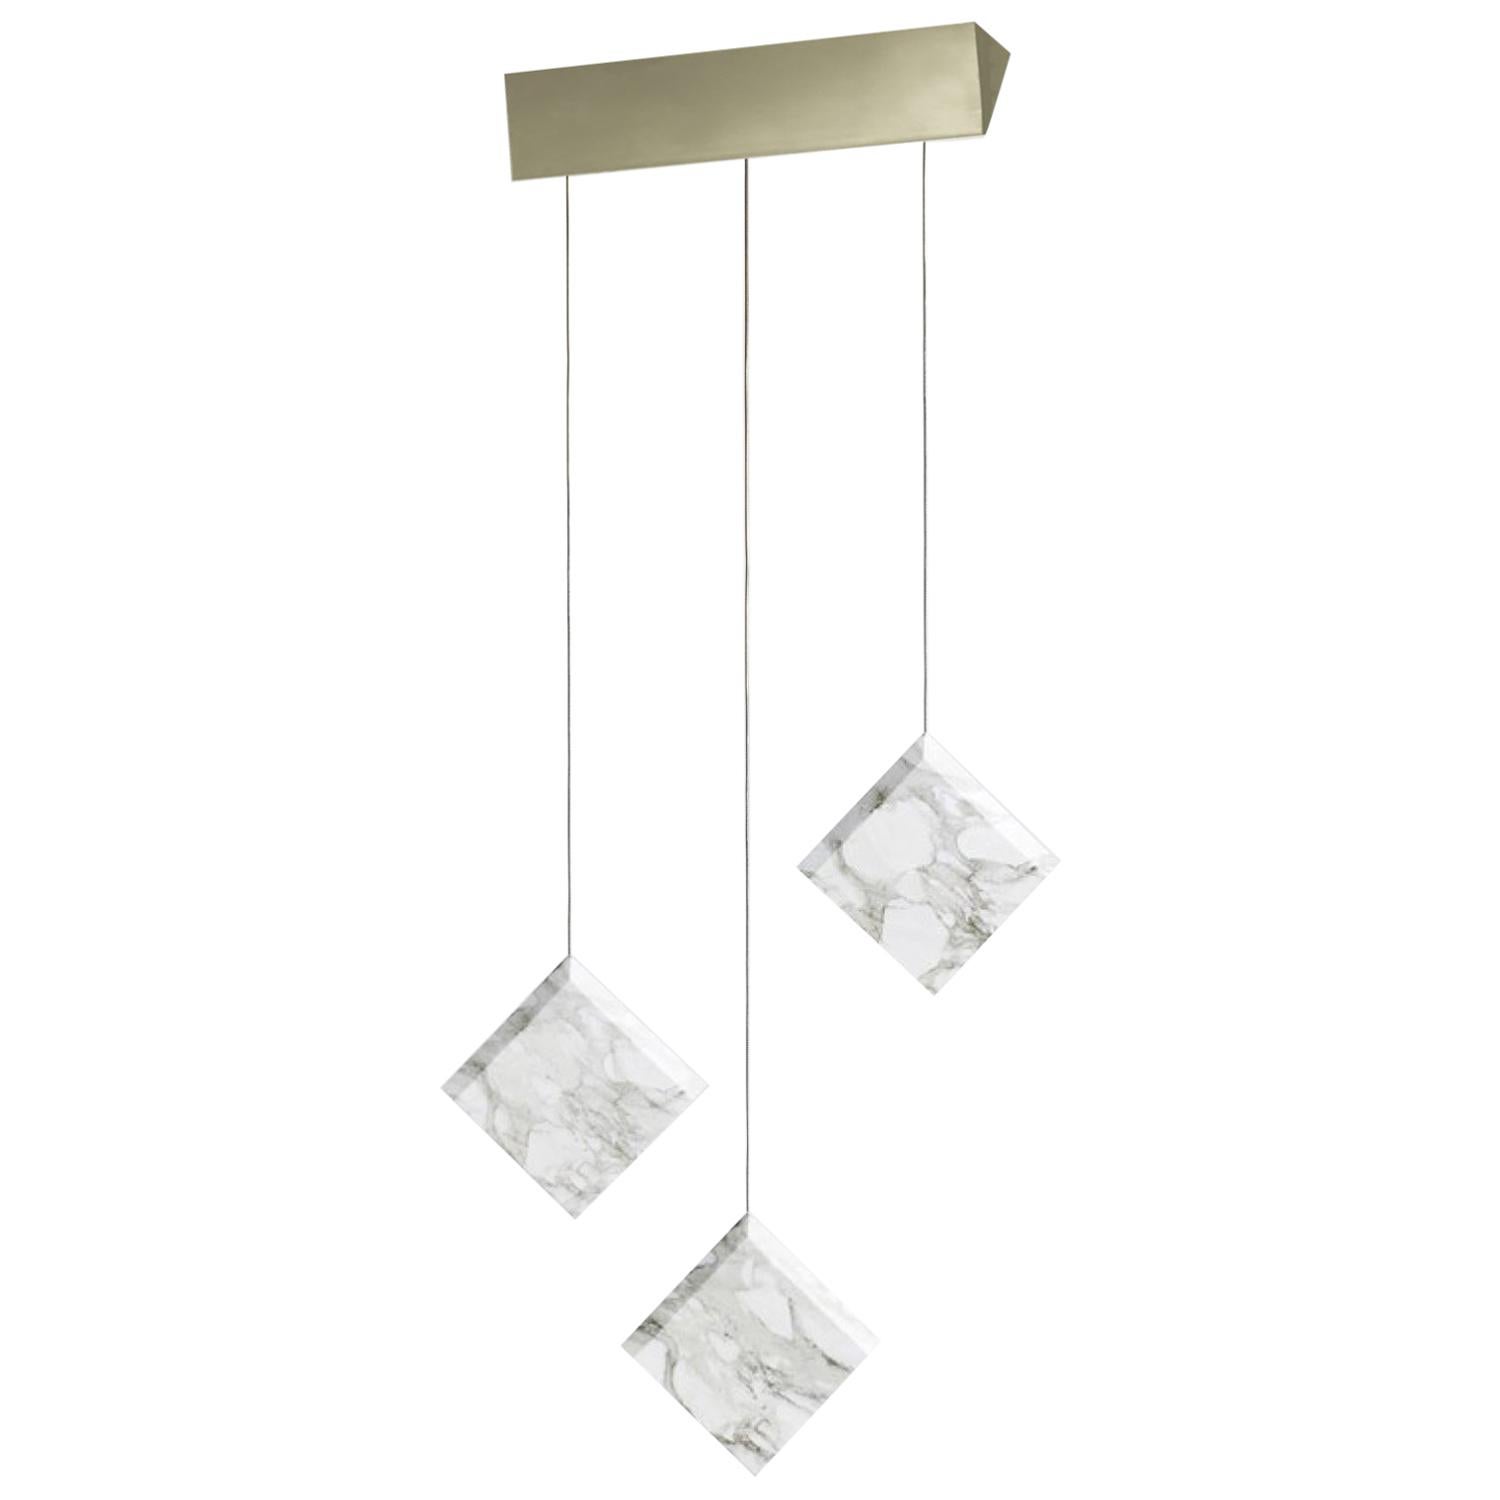 Marble Ceiling lamp "Werner Jr. Calacatta" Satin Gold Mount in Stock For Sale